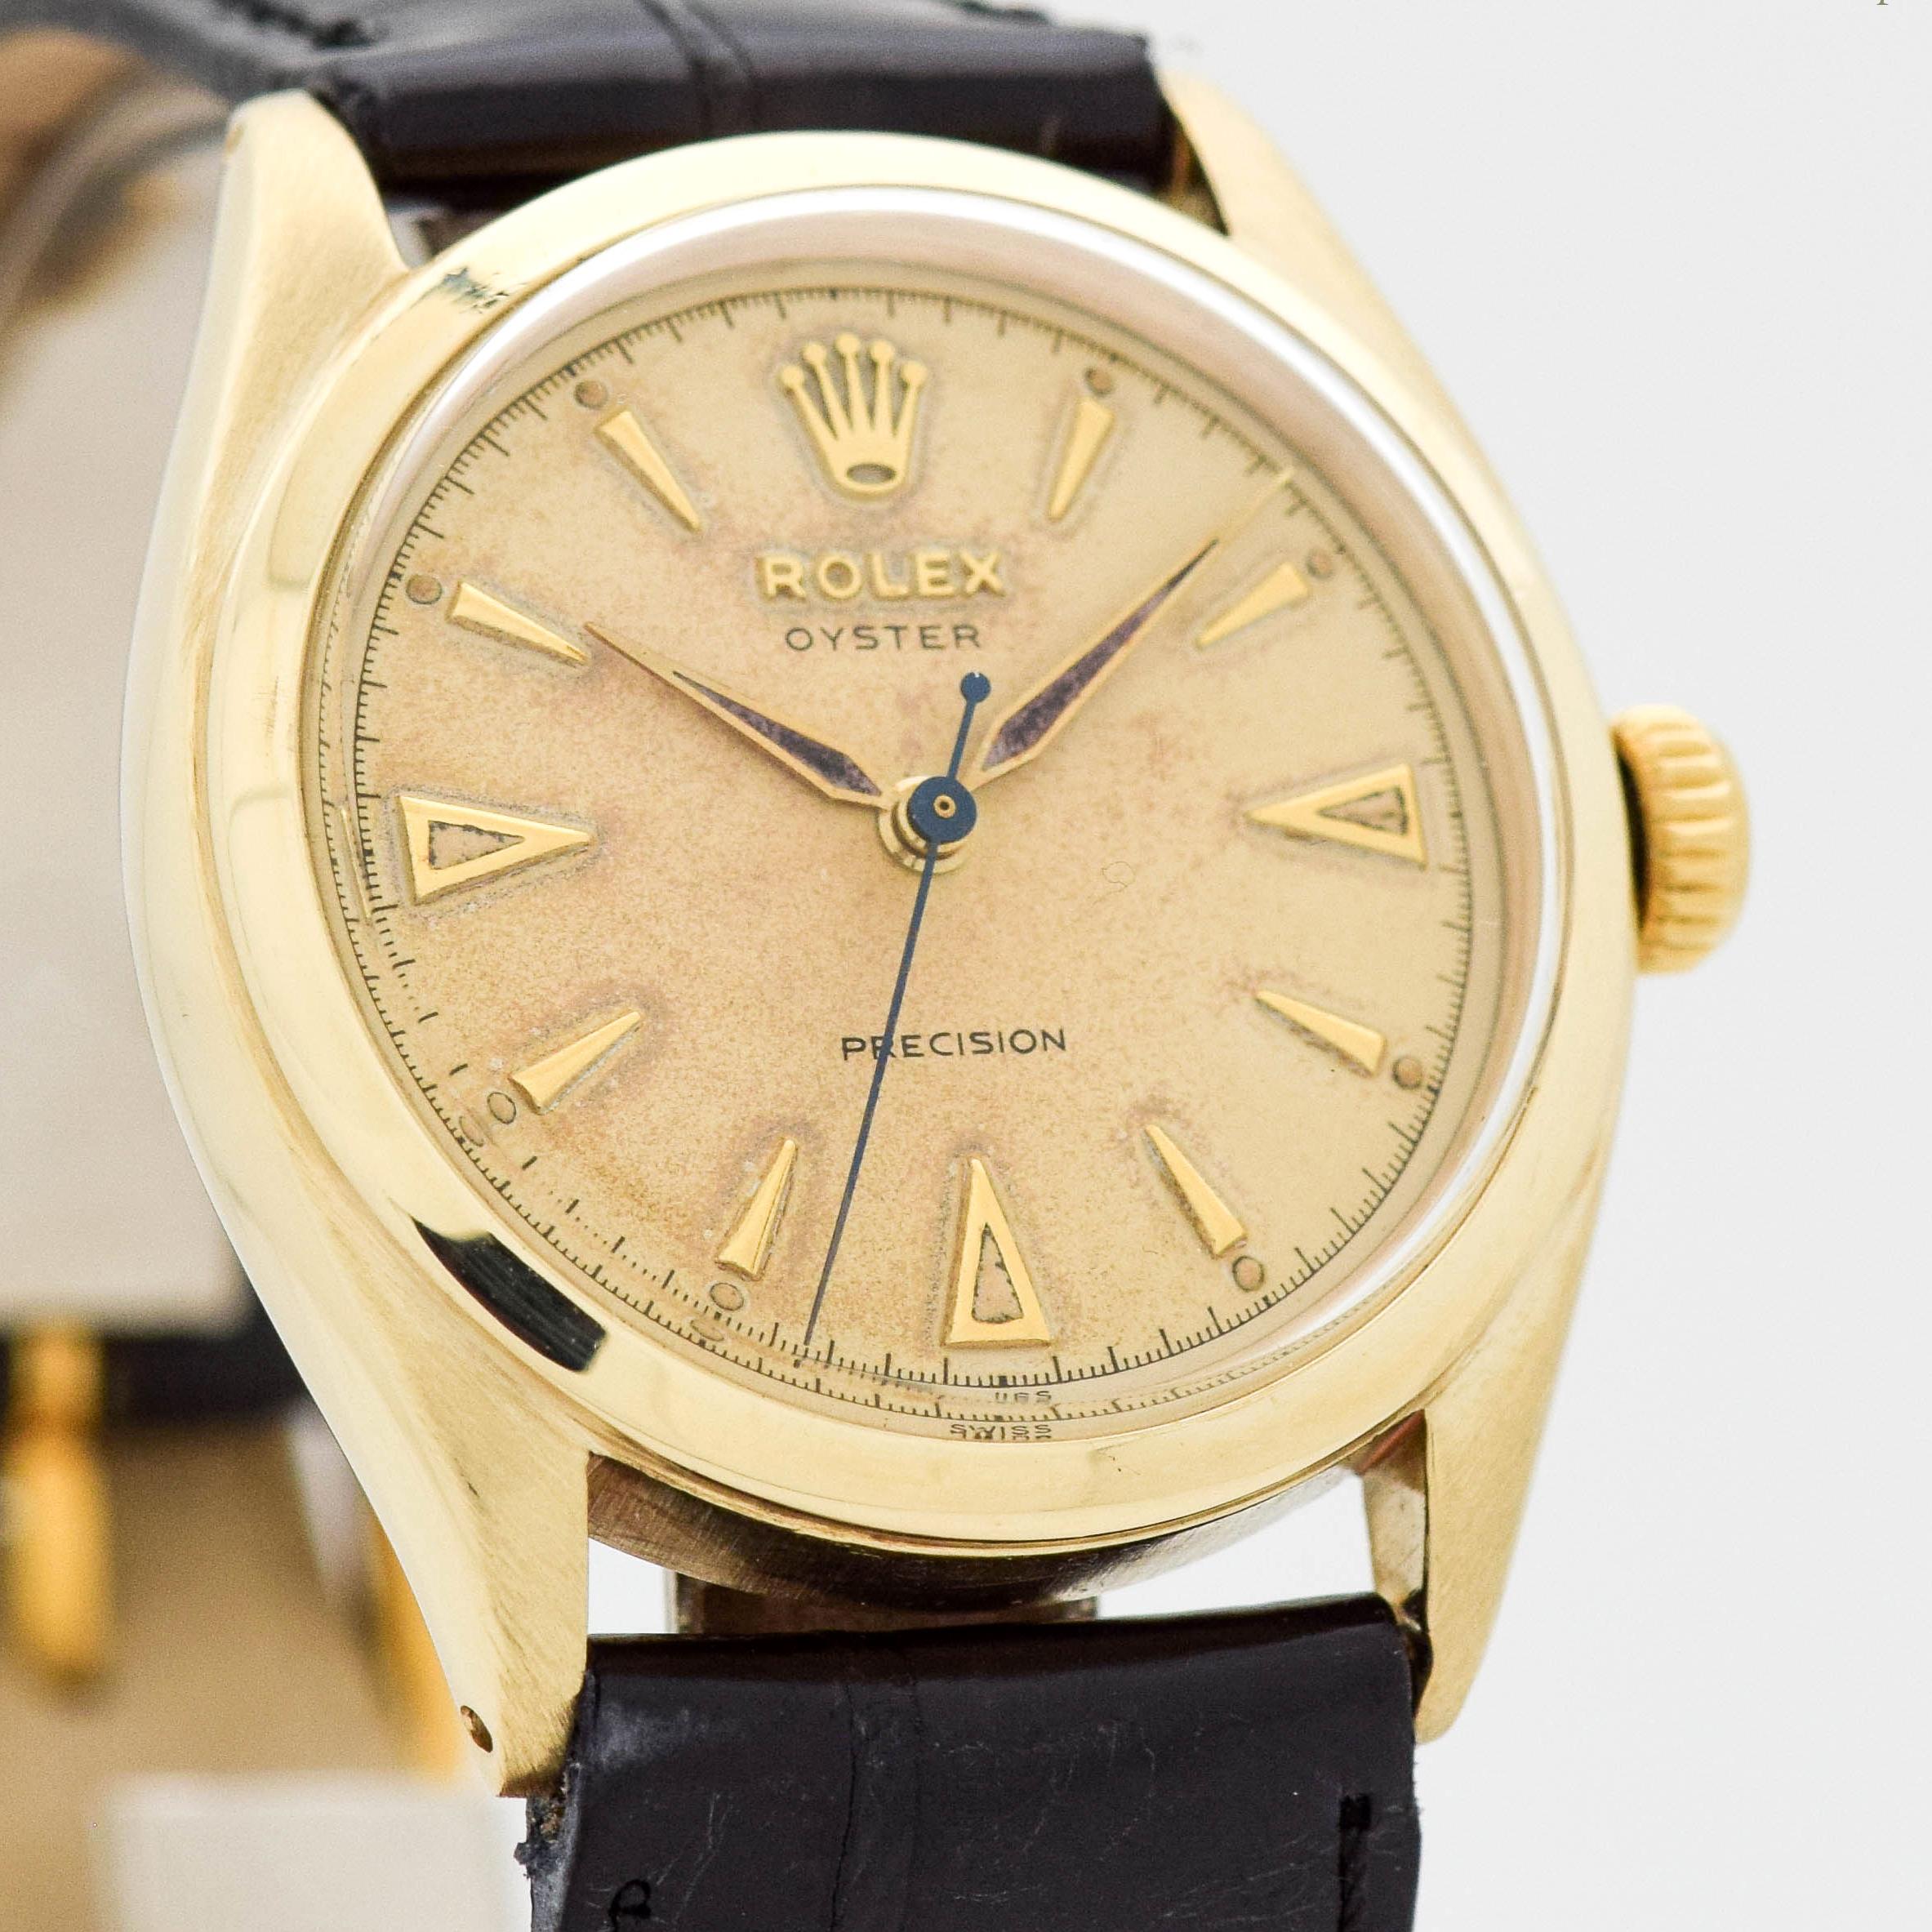 1951 Vintage Rolex Oyster Precision Ref. 6022 10k Yellow Gold watch with Original Silver Dial with Applied Gold Color Elongated Arrow Markers. 34mm x 38mm lug to lug (1.34 in. x 1.5 in.) - 17 jewel, manual caliber movement. Triple Signed.